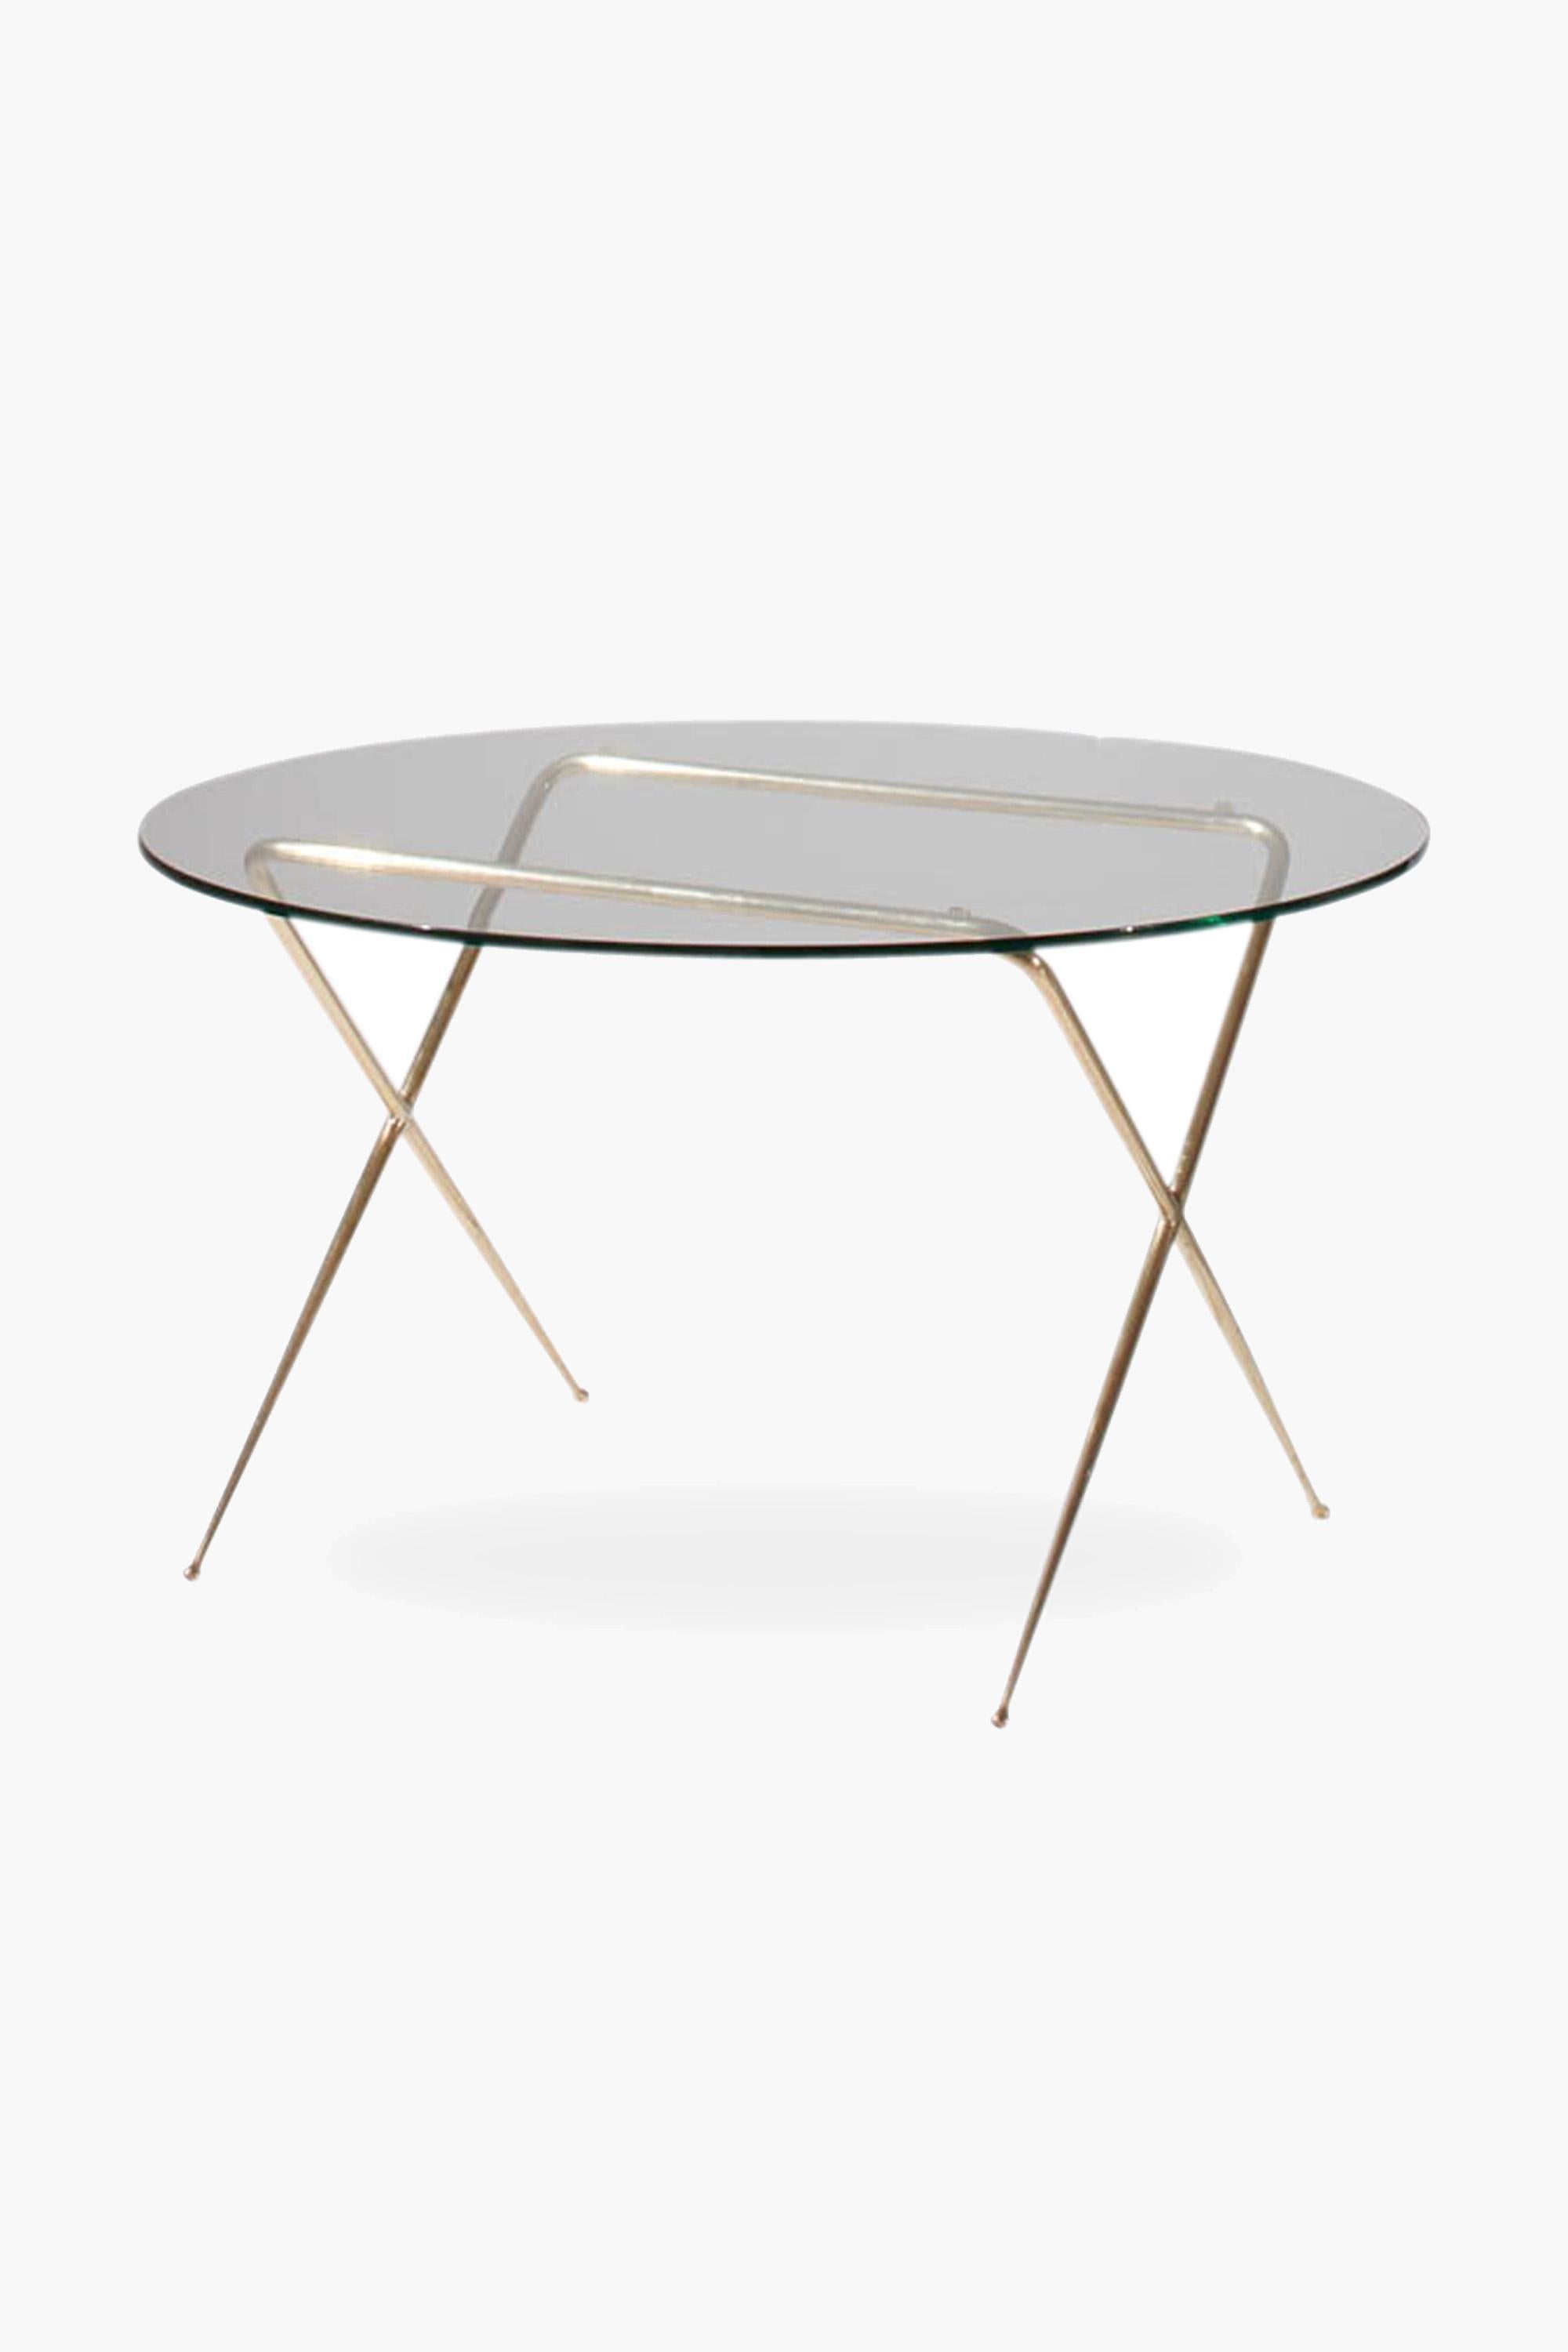 Brass and glass low table by Angelo Lelii

The same frame design was used for a magazine rack, Model n°13007, published in 